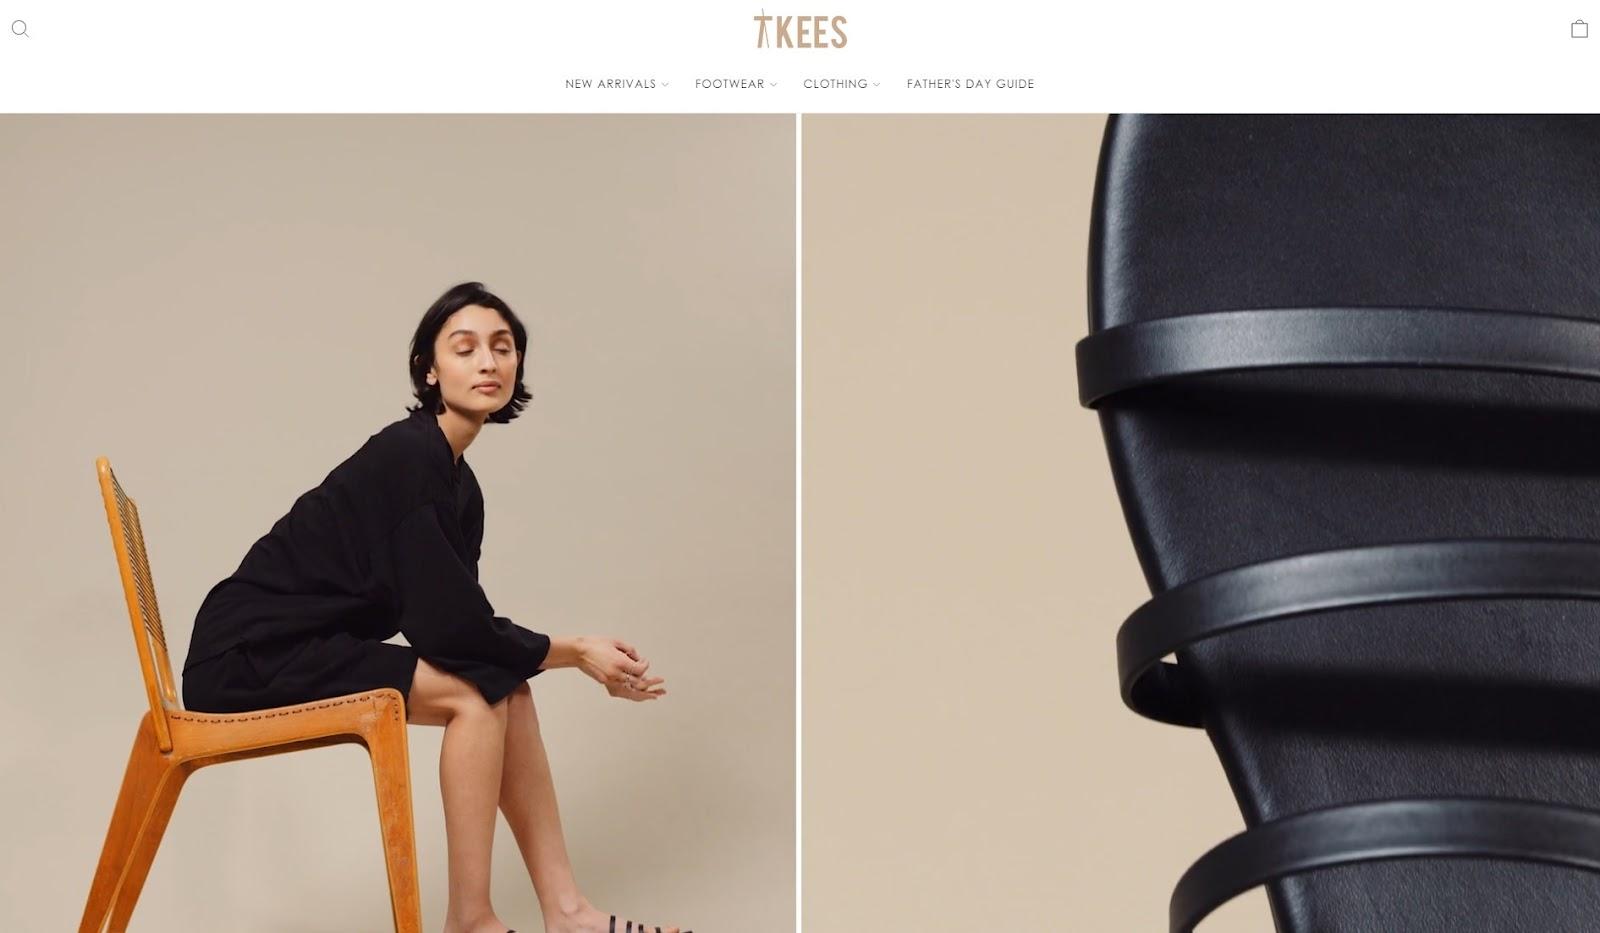 tkees sandal product landing page above the fold video